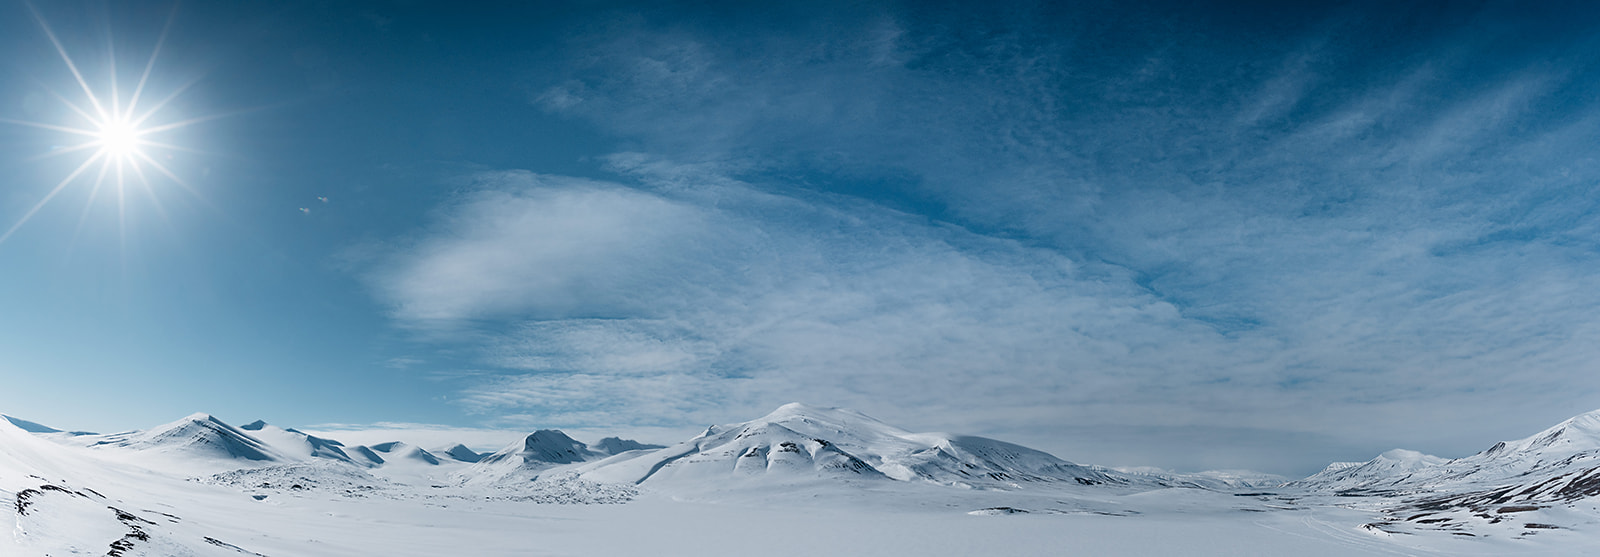 snow covered mountain range on a bright day on Svalbard